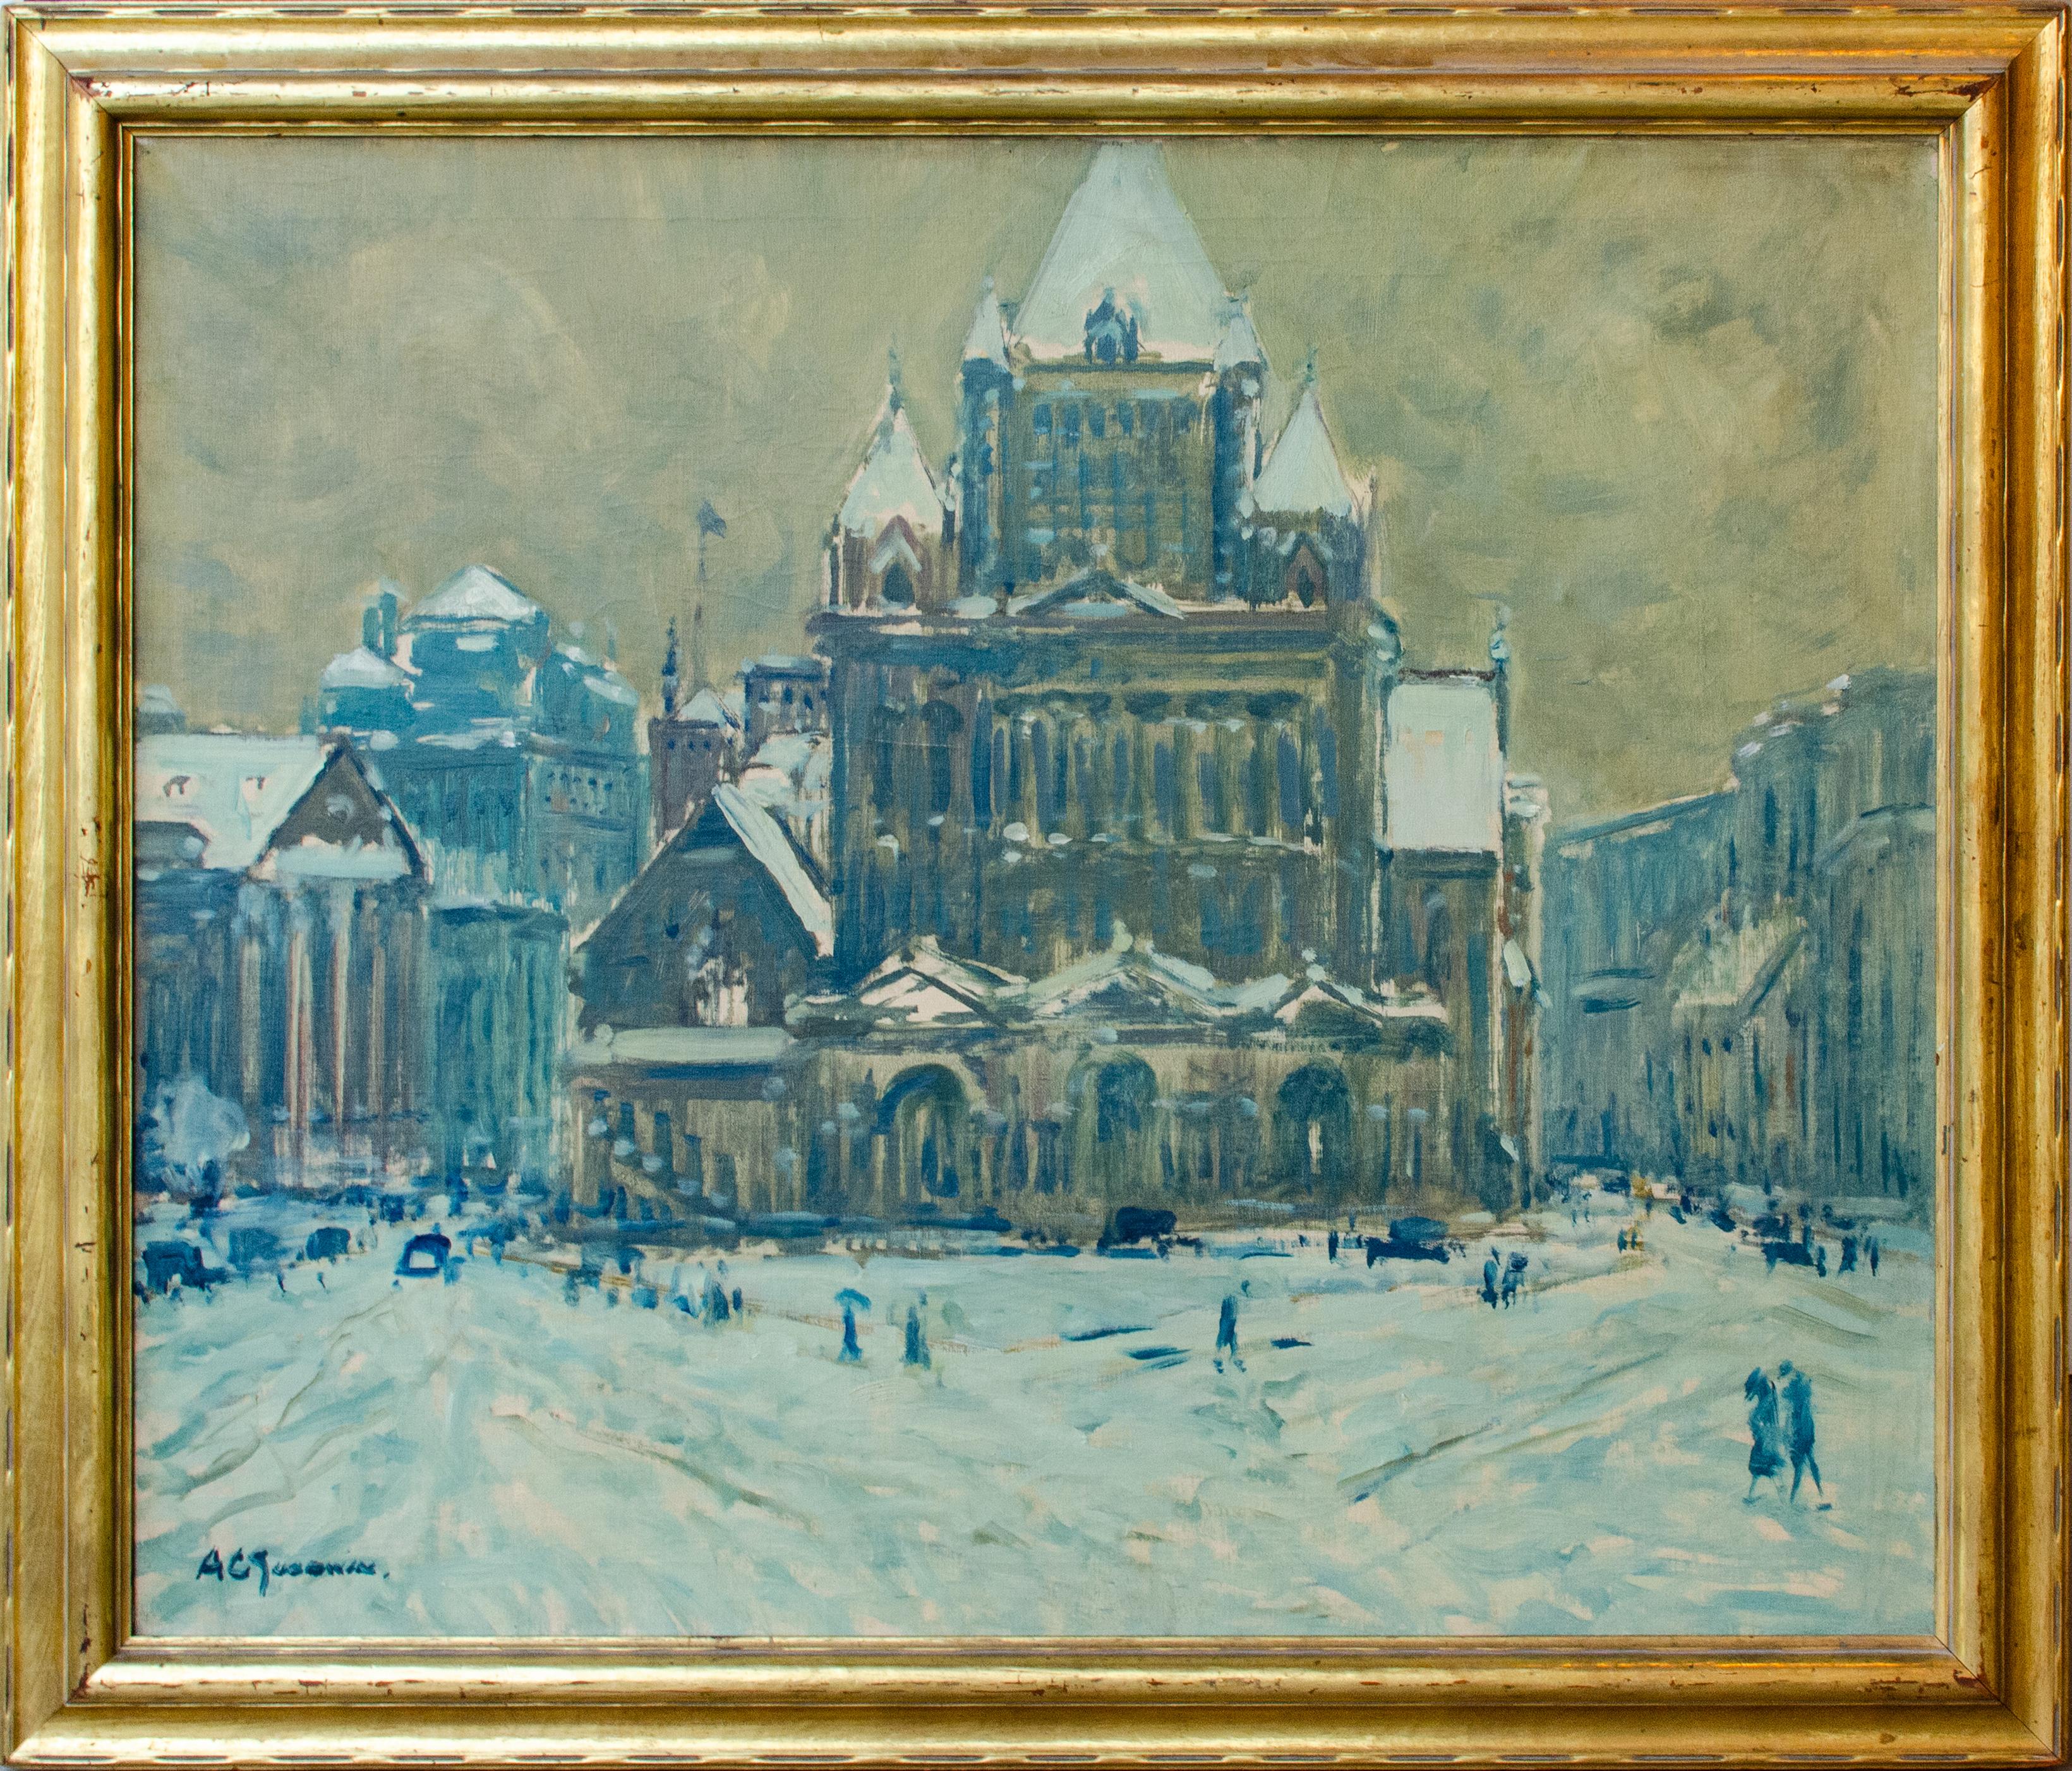 Arthur Clifton Goodwin
Trinity Church, Boston, 1928
Signed lower left
Oil on canvas
30 x 36 inches

Provenance:
Sotheby’s New York, American Art, May 24, 1990, Lot 166
Private Collection, Washington, D.C. (acquired from the above)

Recognized for